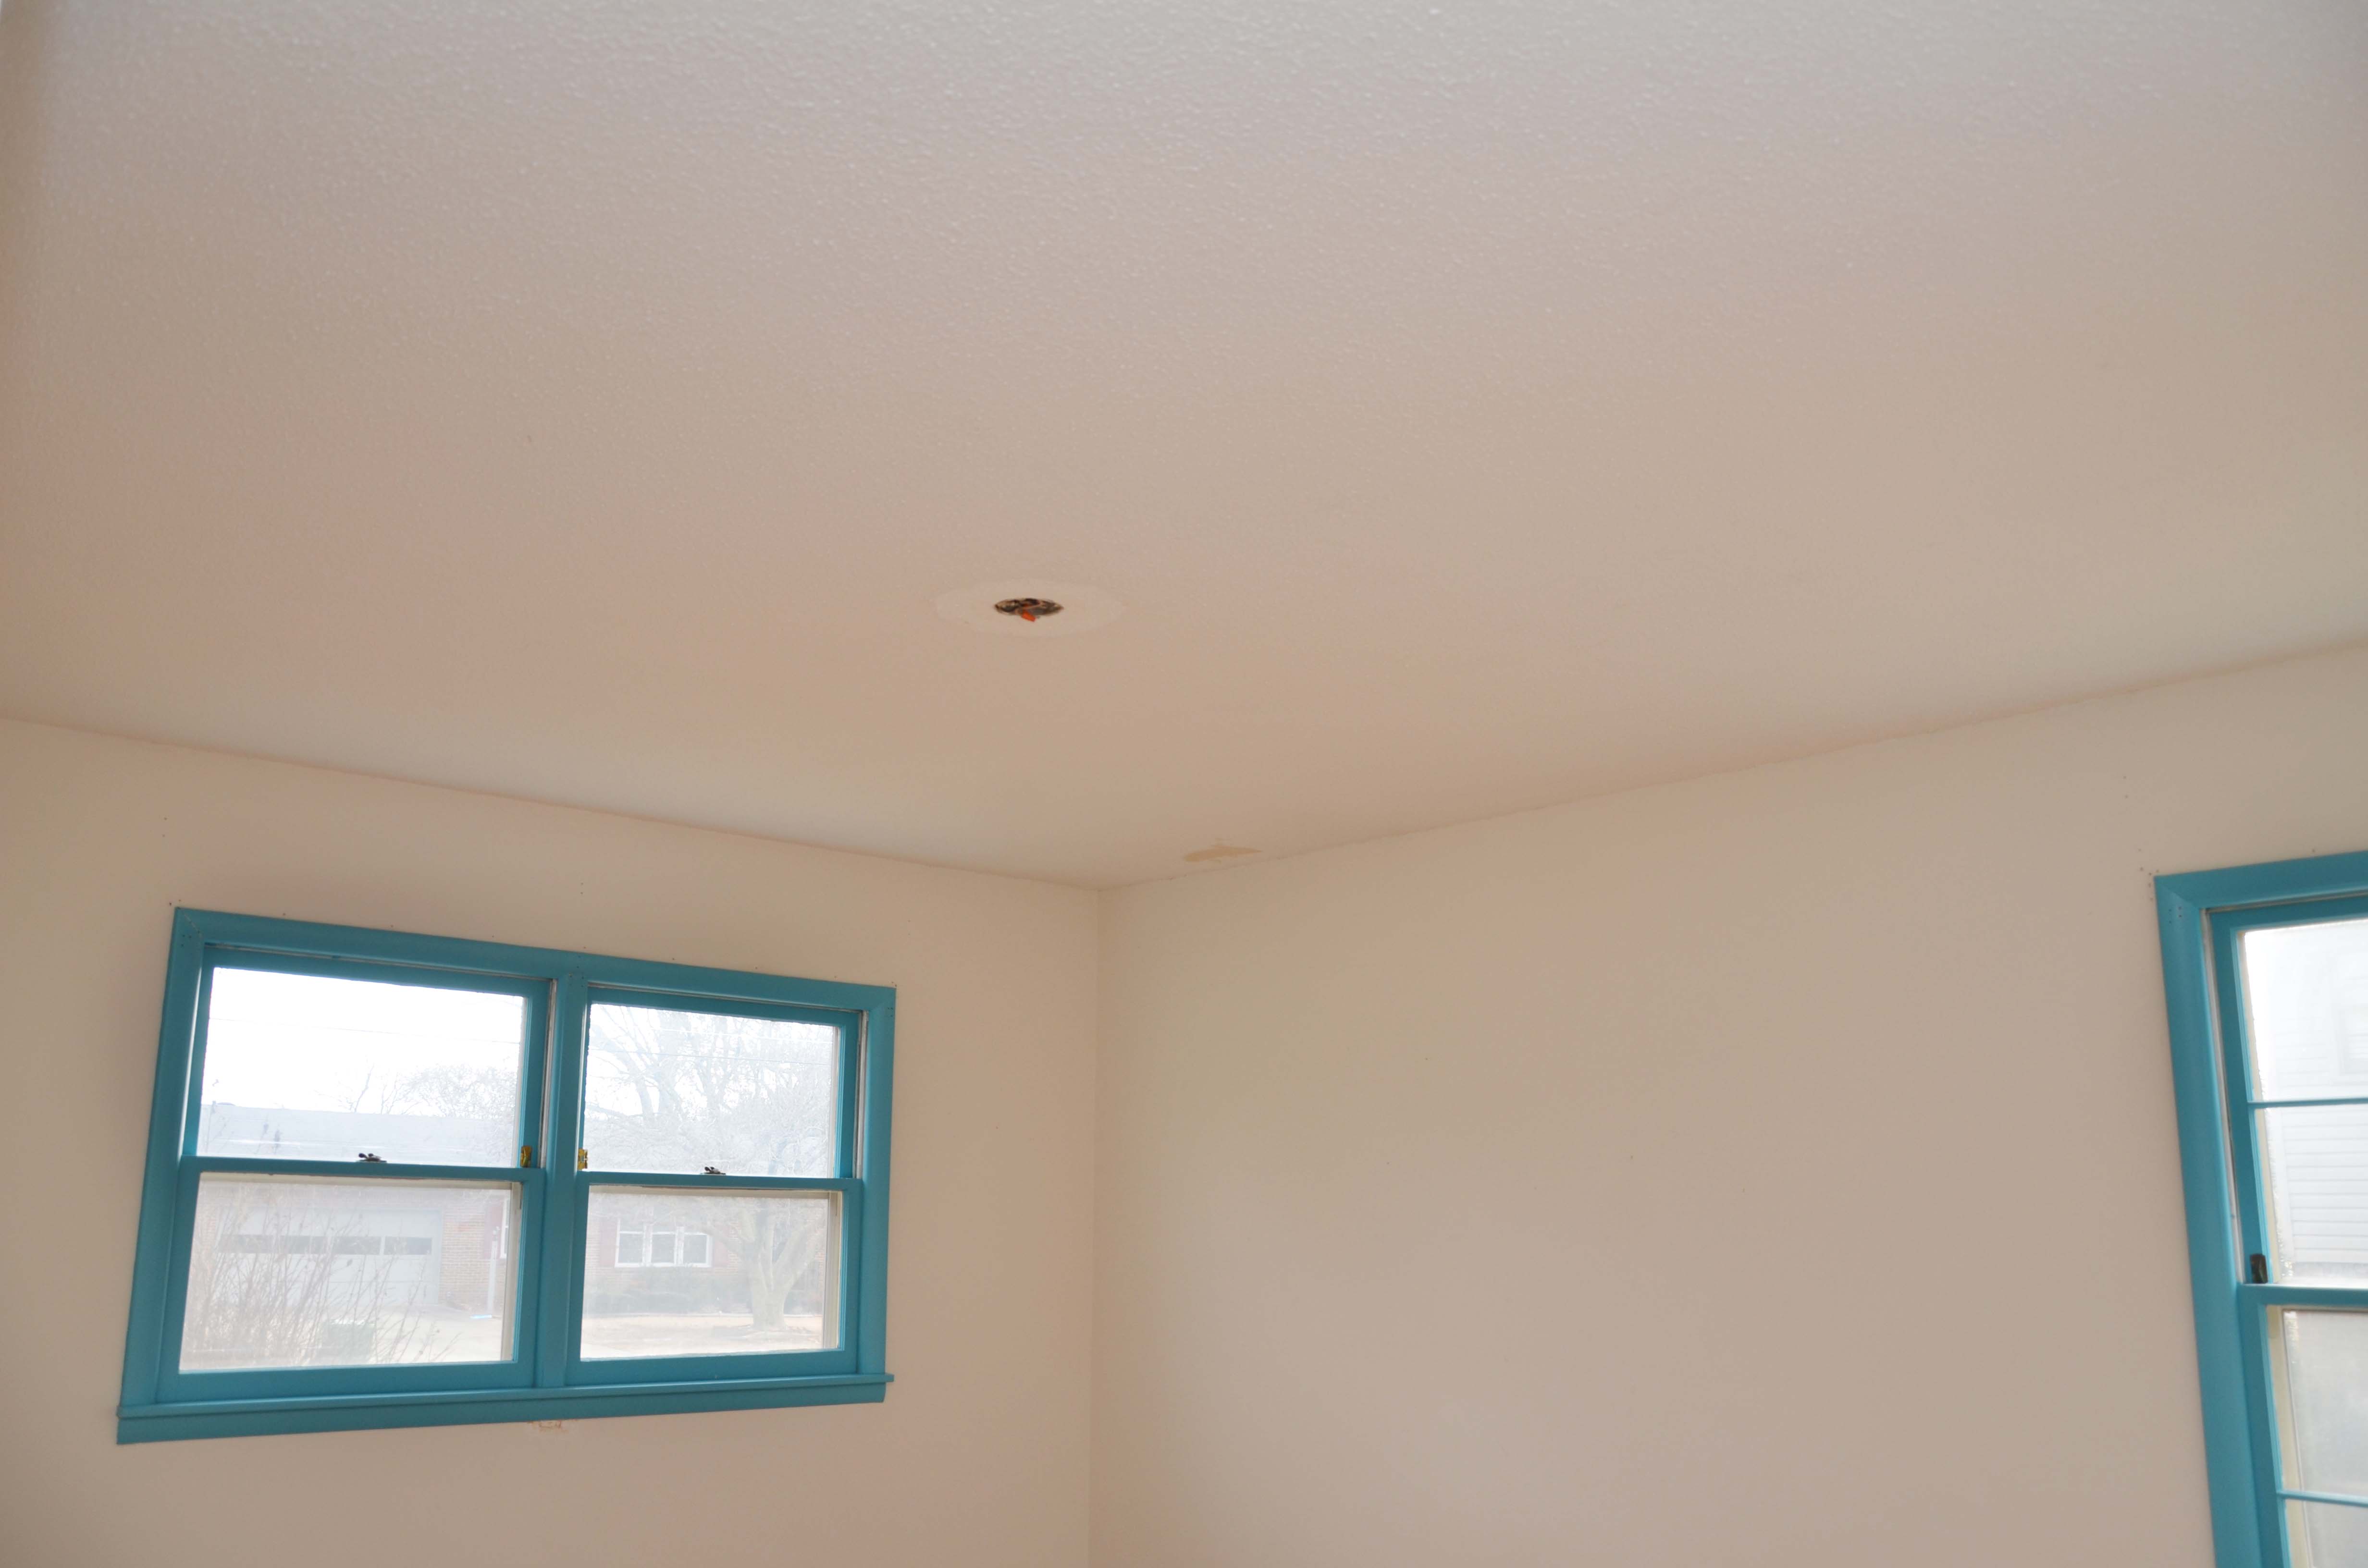 How To Scrape Painted Popcorn Ceilings And Baby Room Update